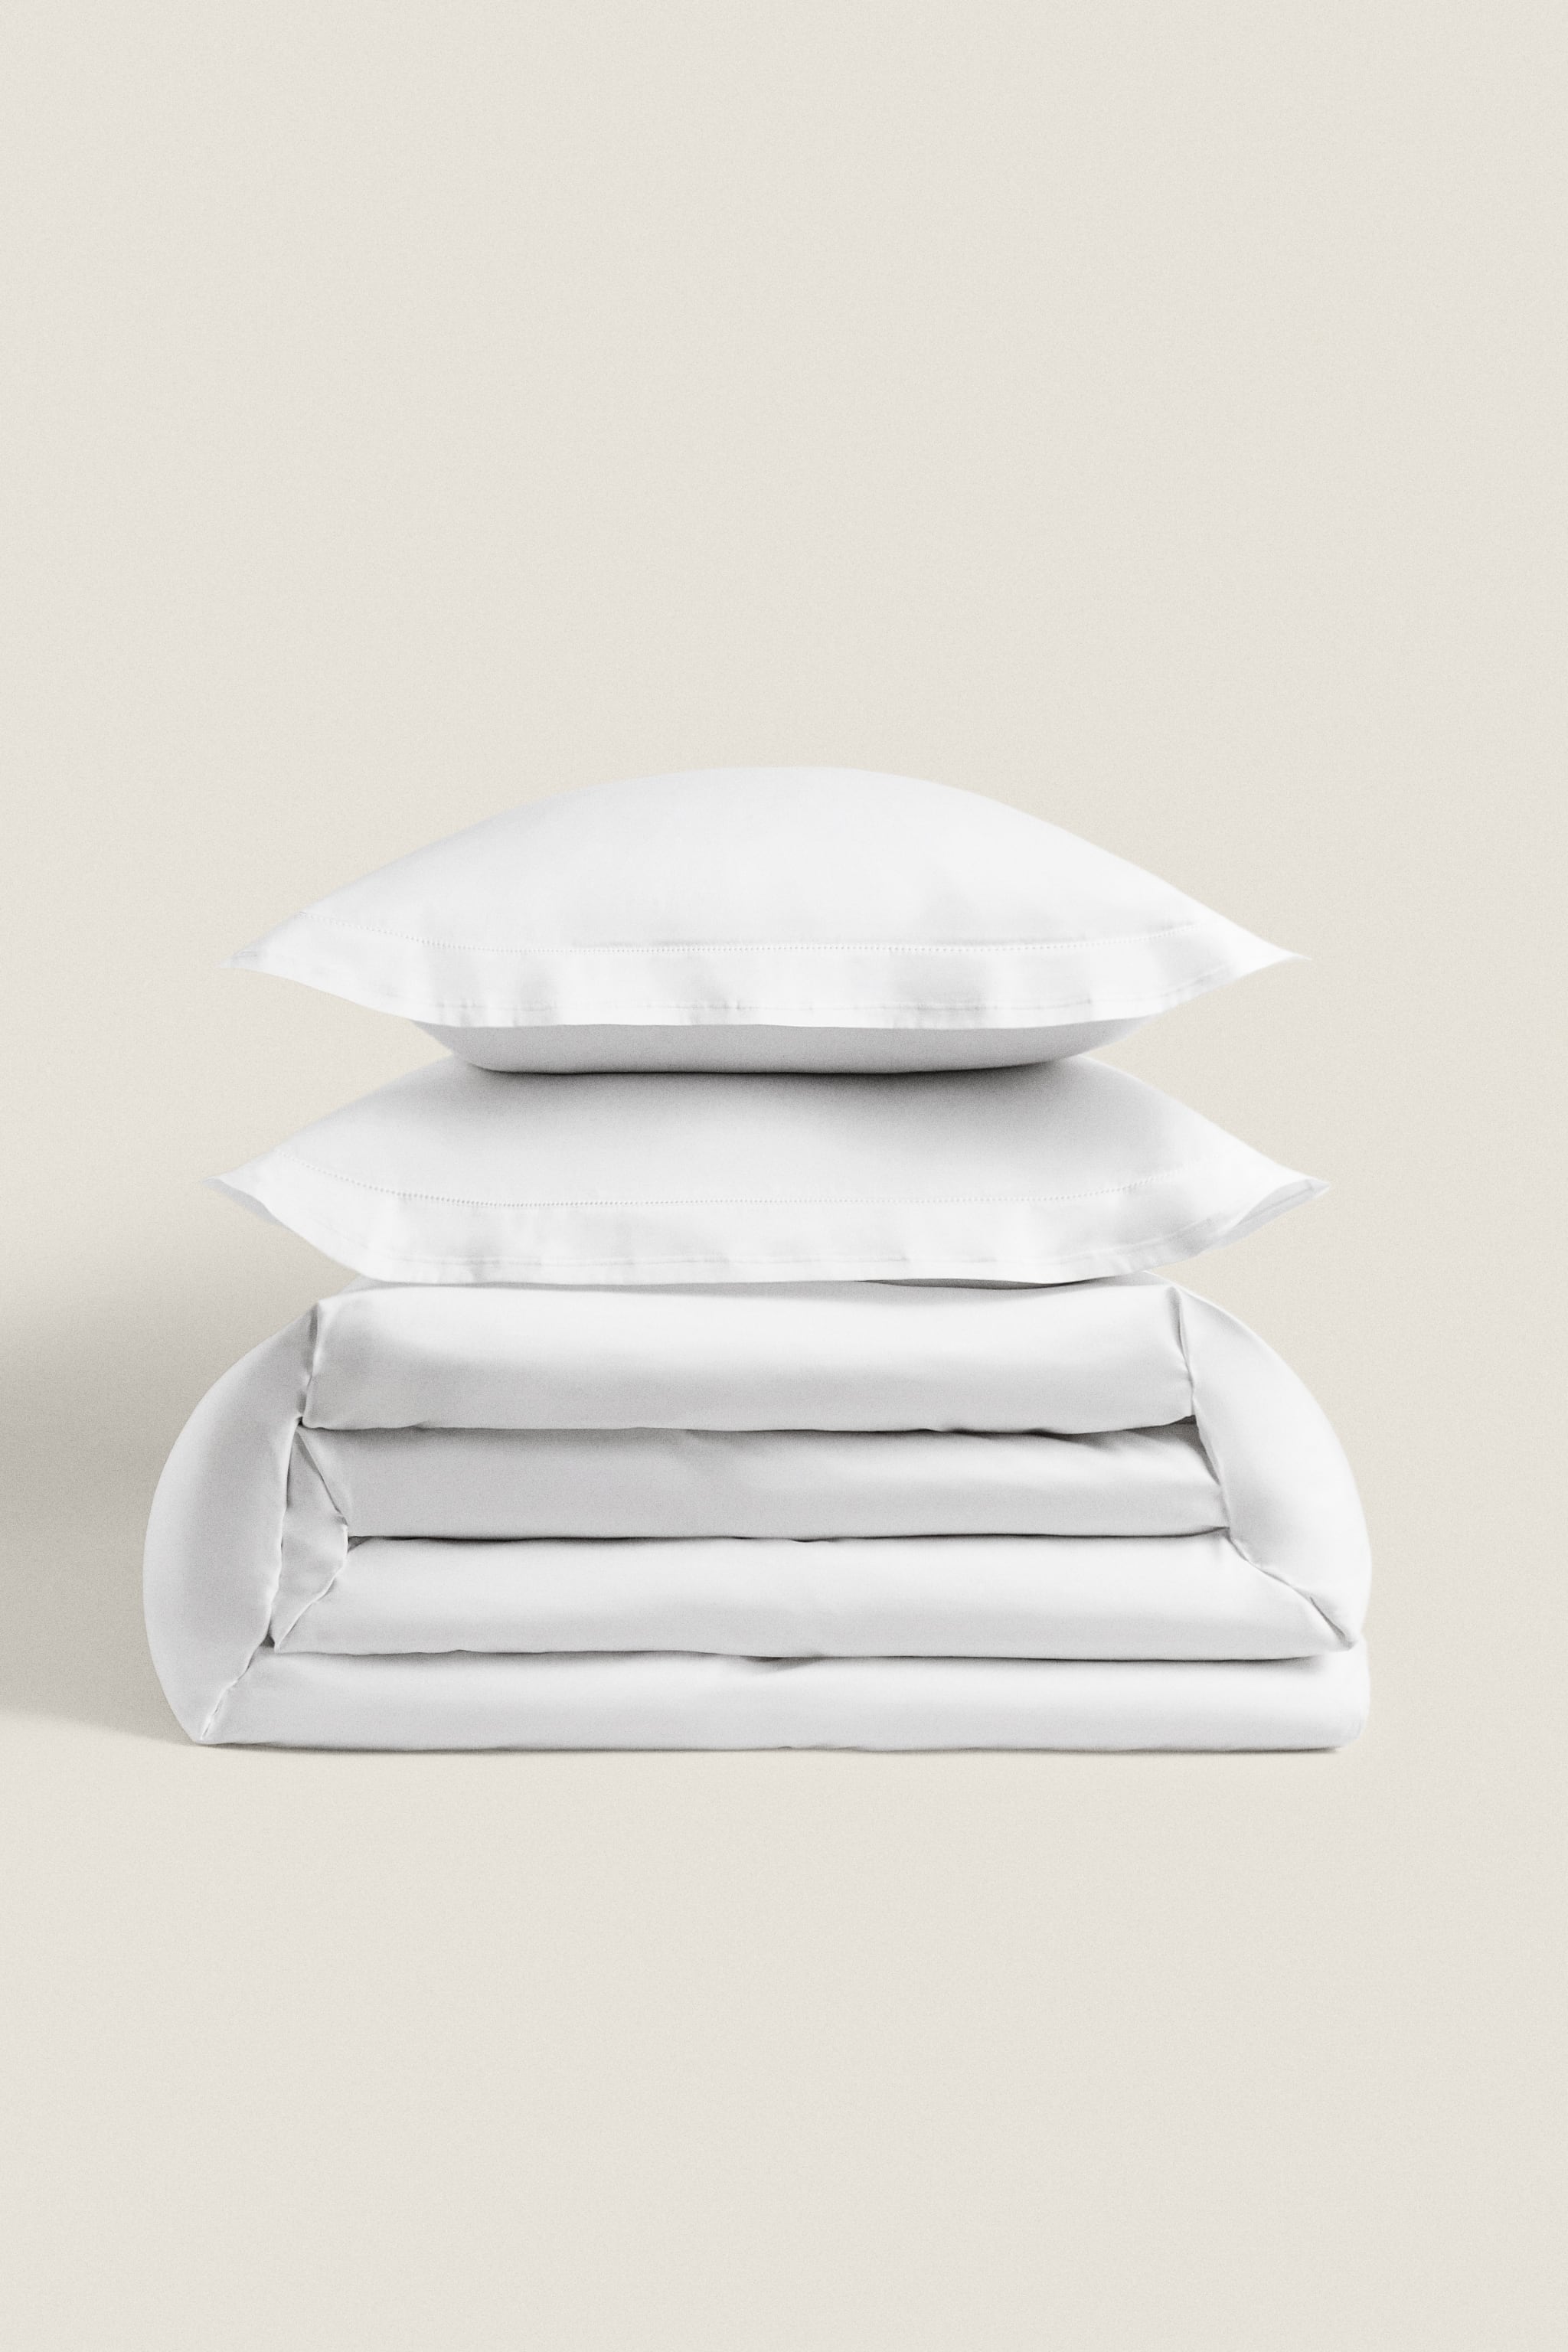 (300-THREAD-COUNT) SATEEN DUVET COVER WITH TRIM